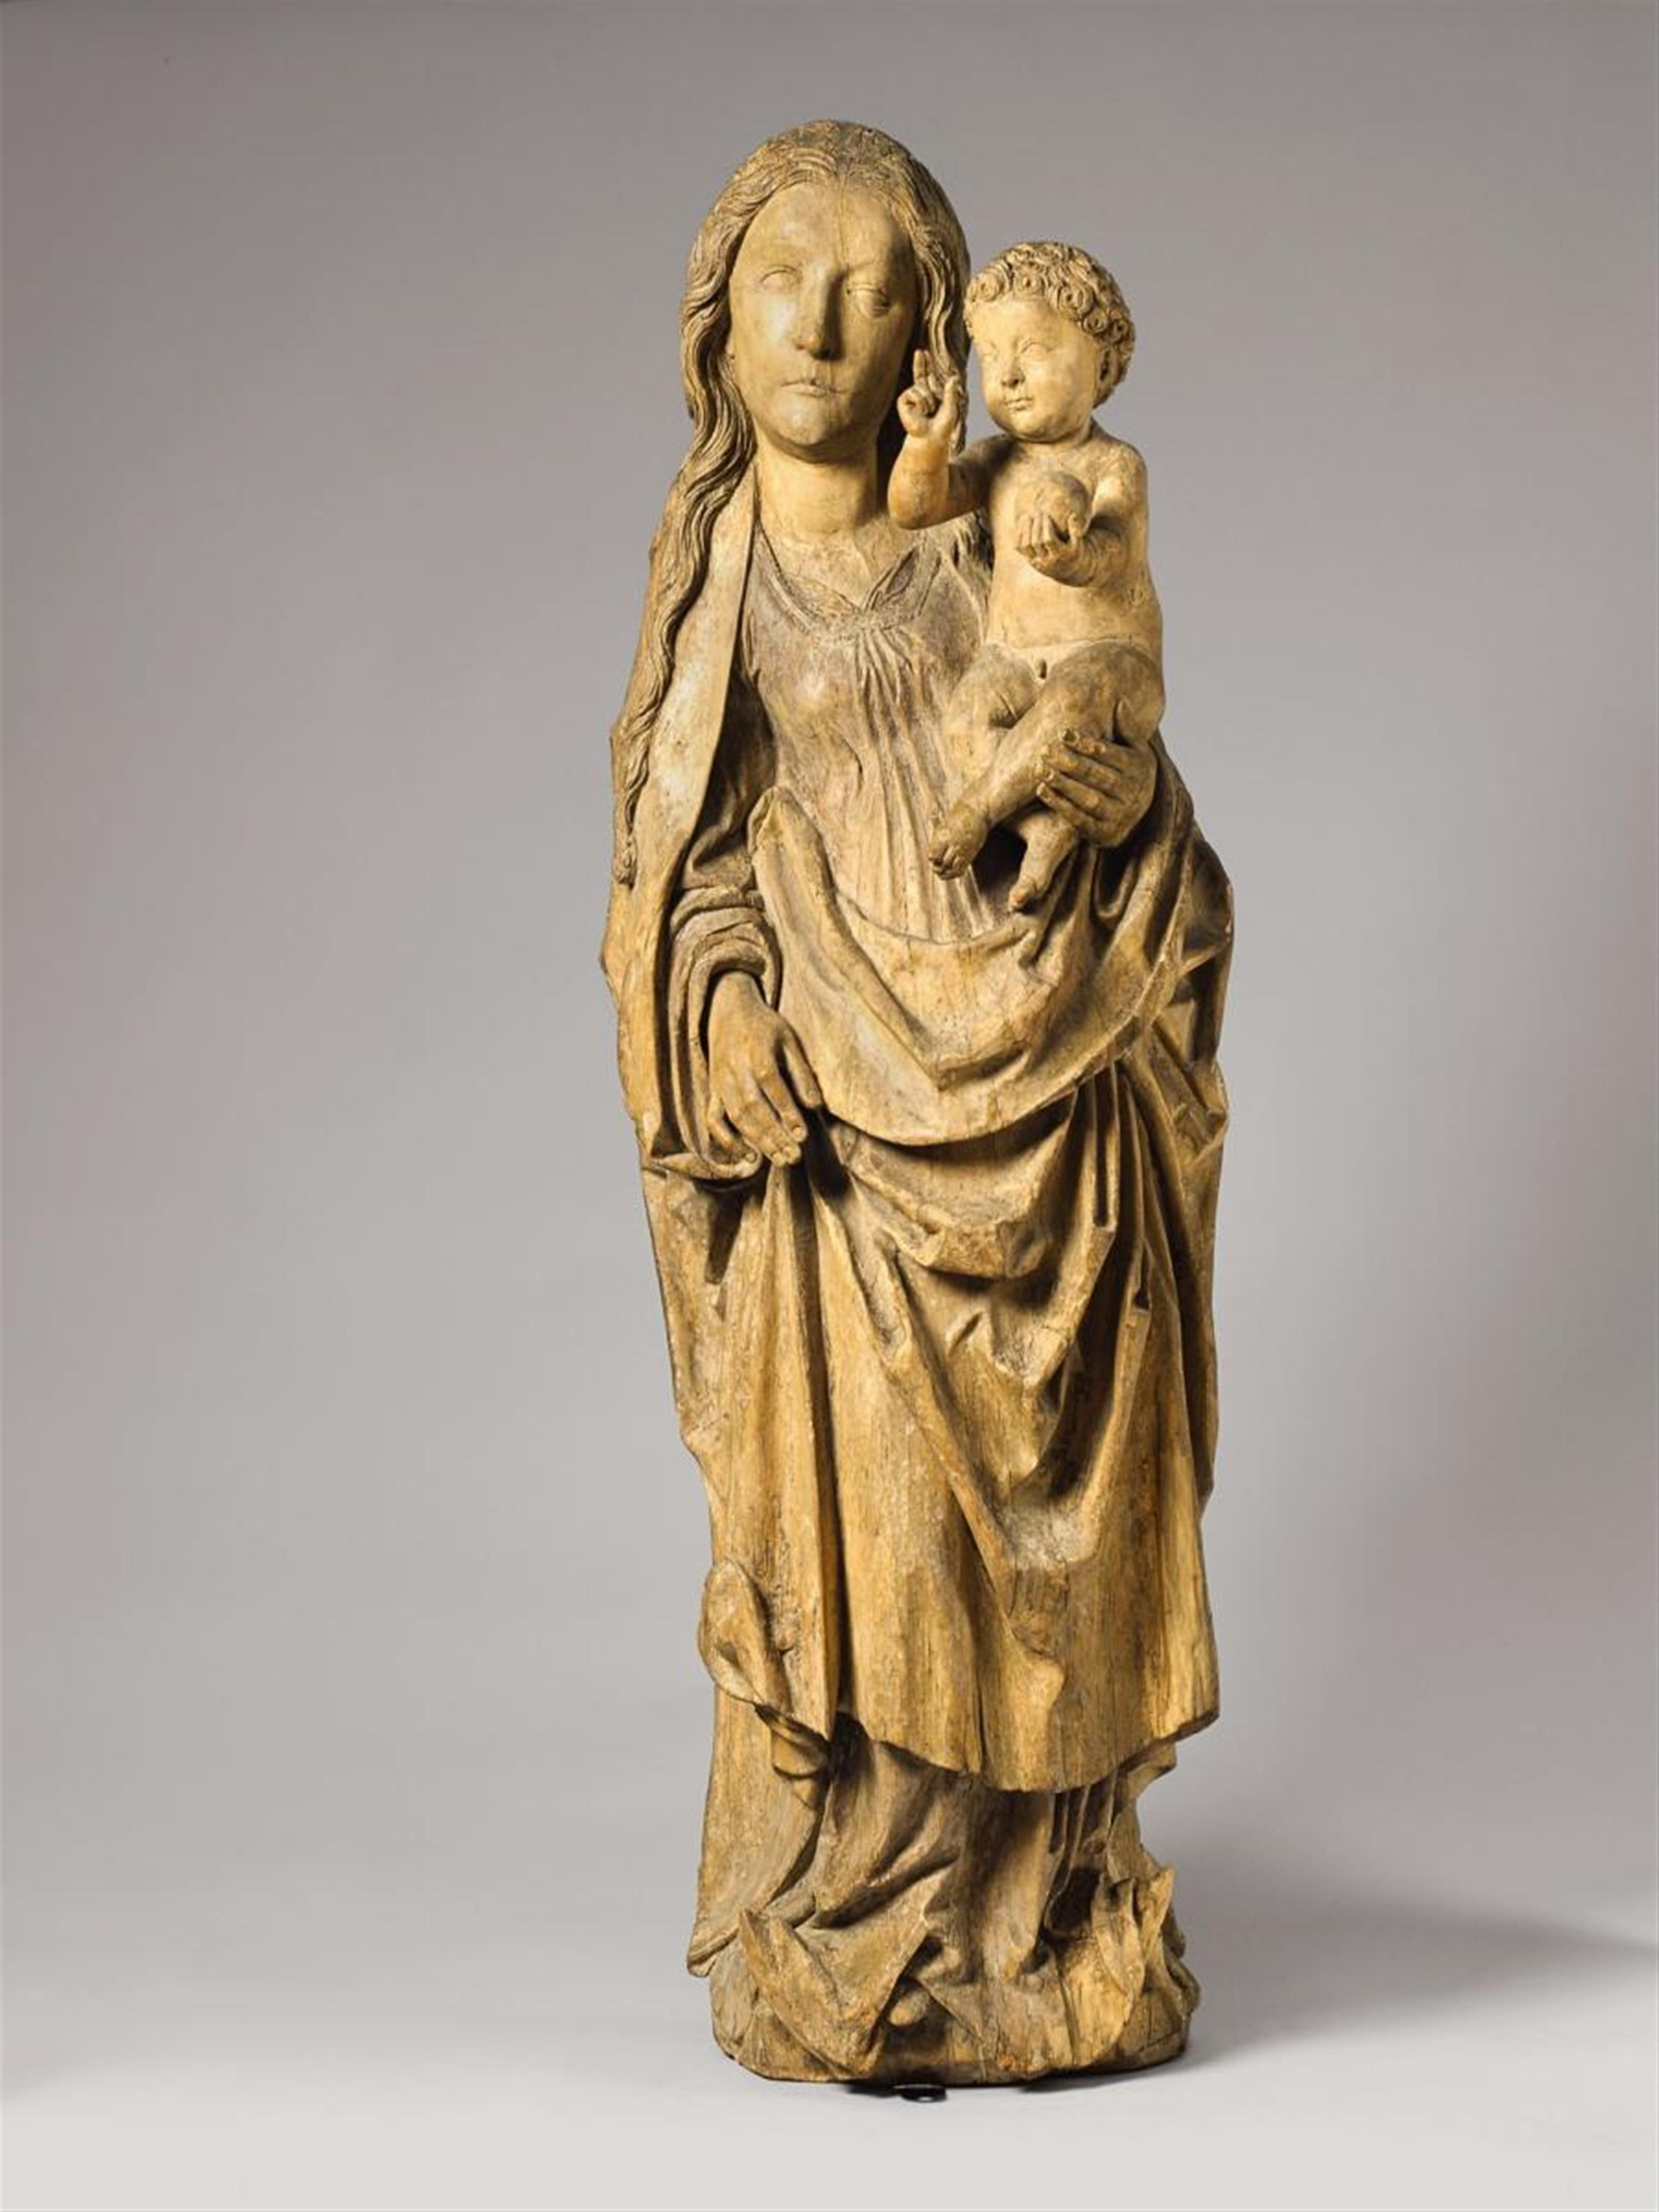 Tilman Riemenschneider, circle of - AN EARLY 16TH CENTURY WOOD FIGURE OF THE VIRGIN WITH CHILD FROM THE CIRCLE OF TILMAN RIEMENSCHNEID